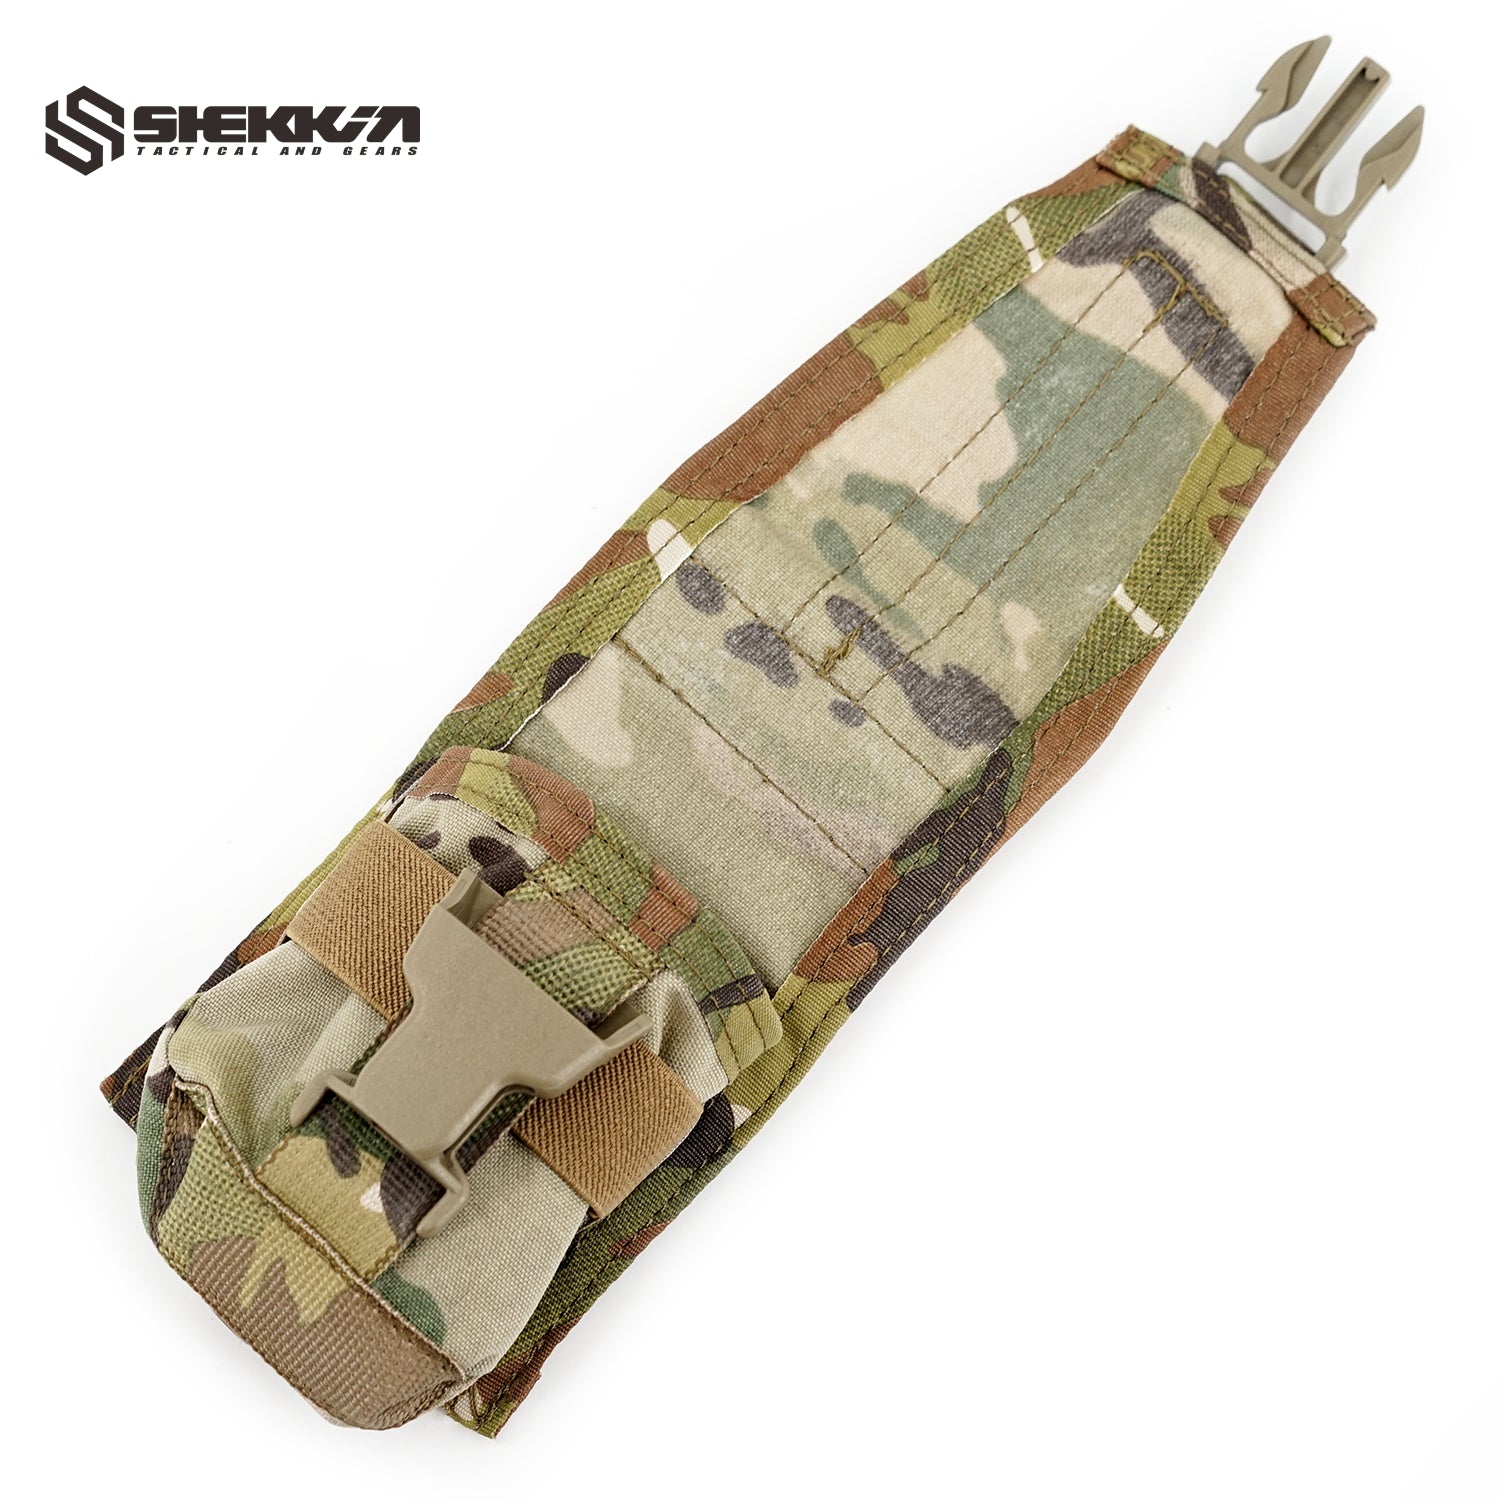 Thermobaric grenade pouch - Shekkin Gears